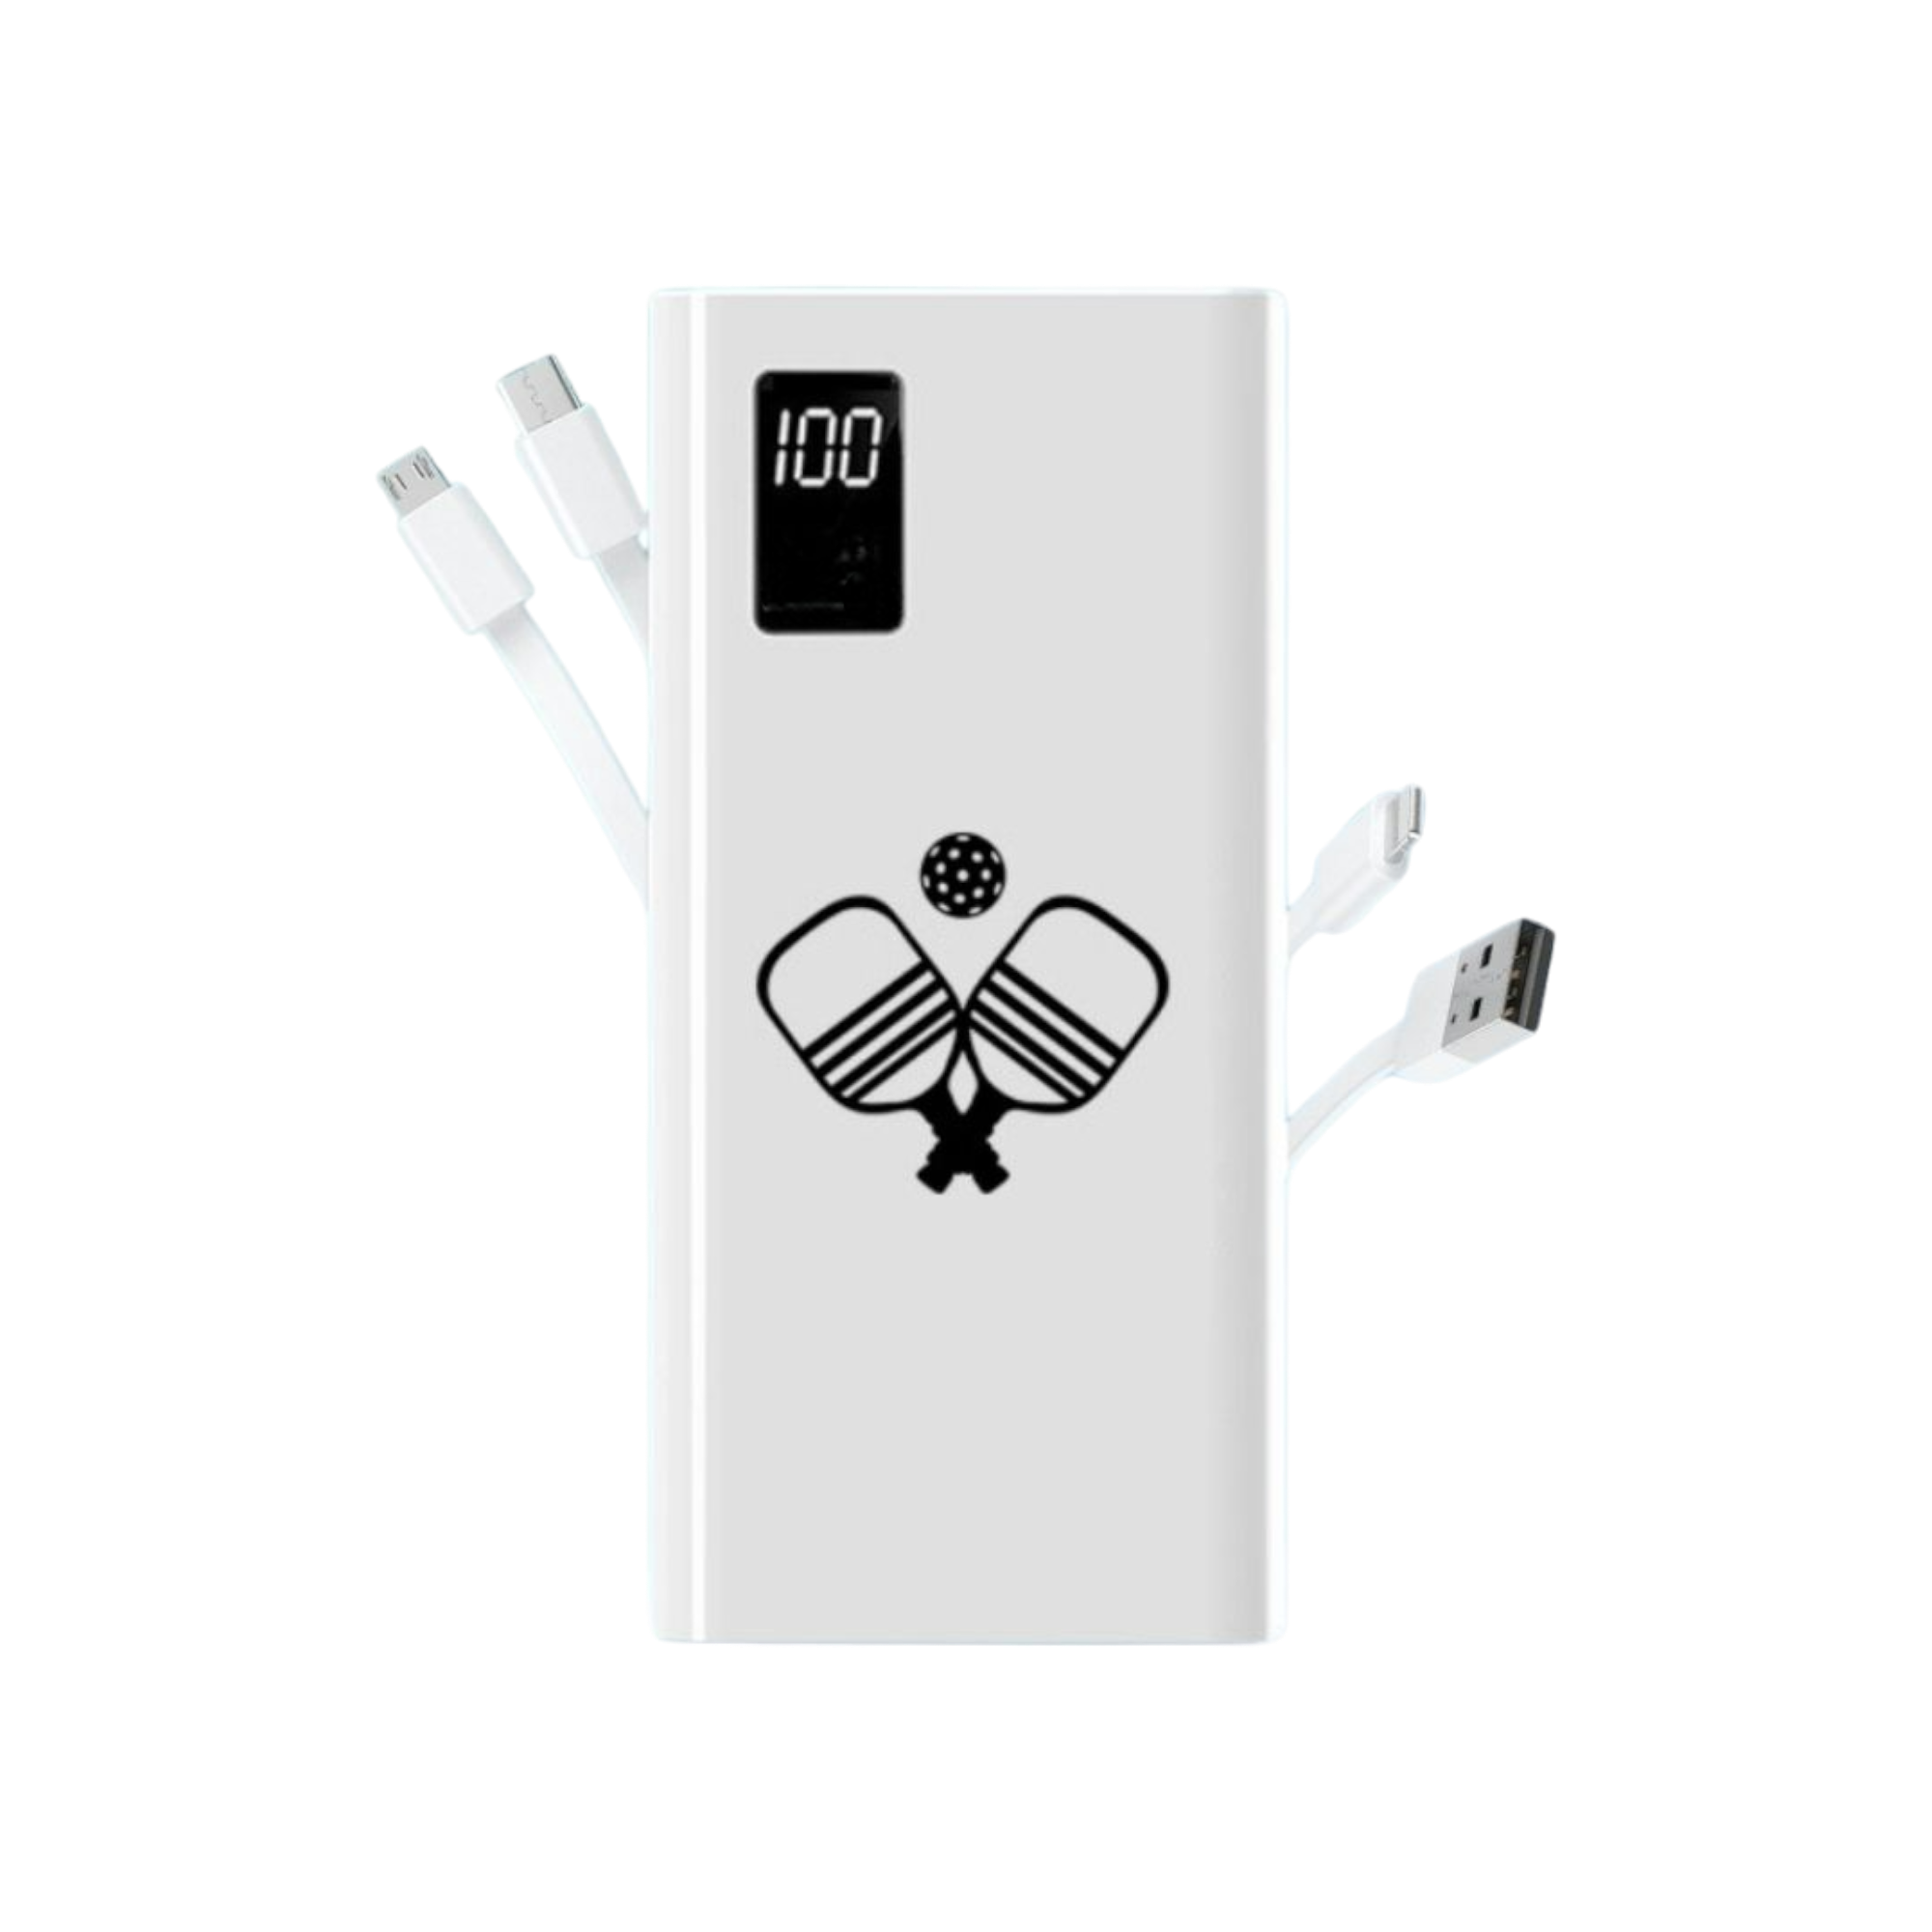 5-in-1 Portable Charger with built-in cords- Paddle Design White